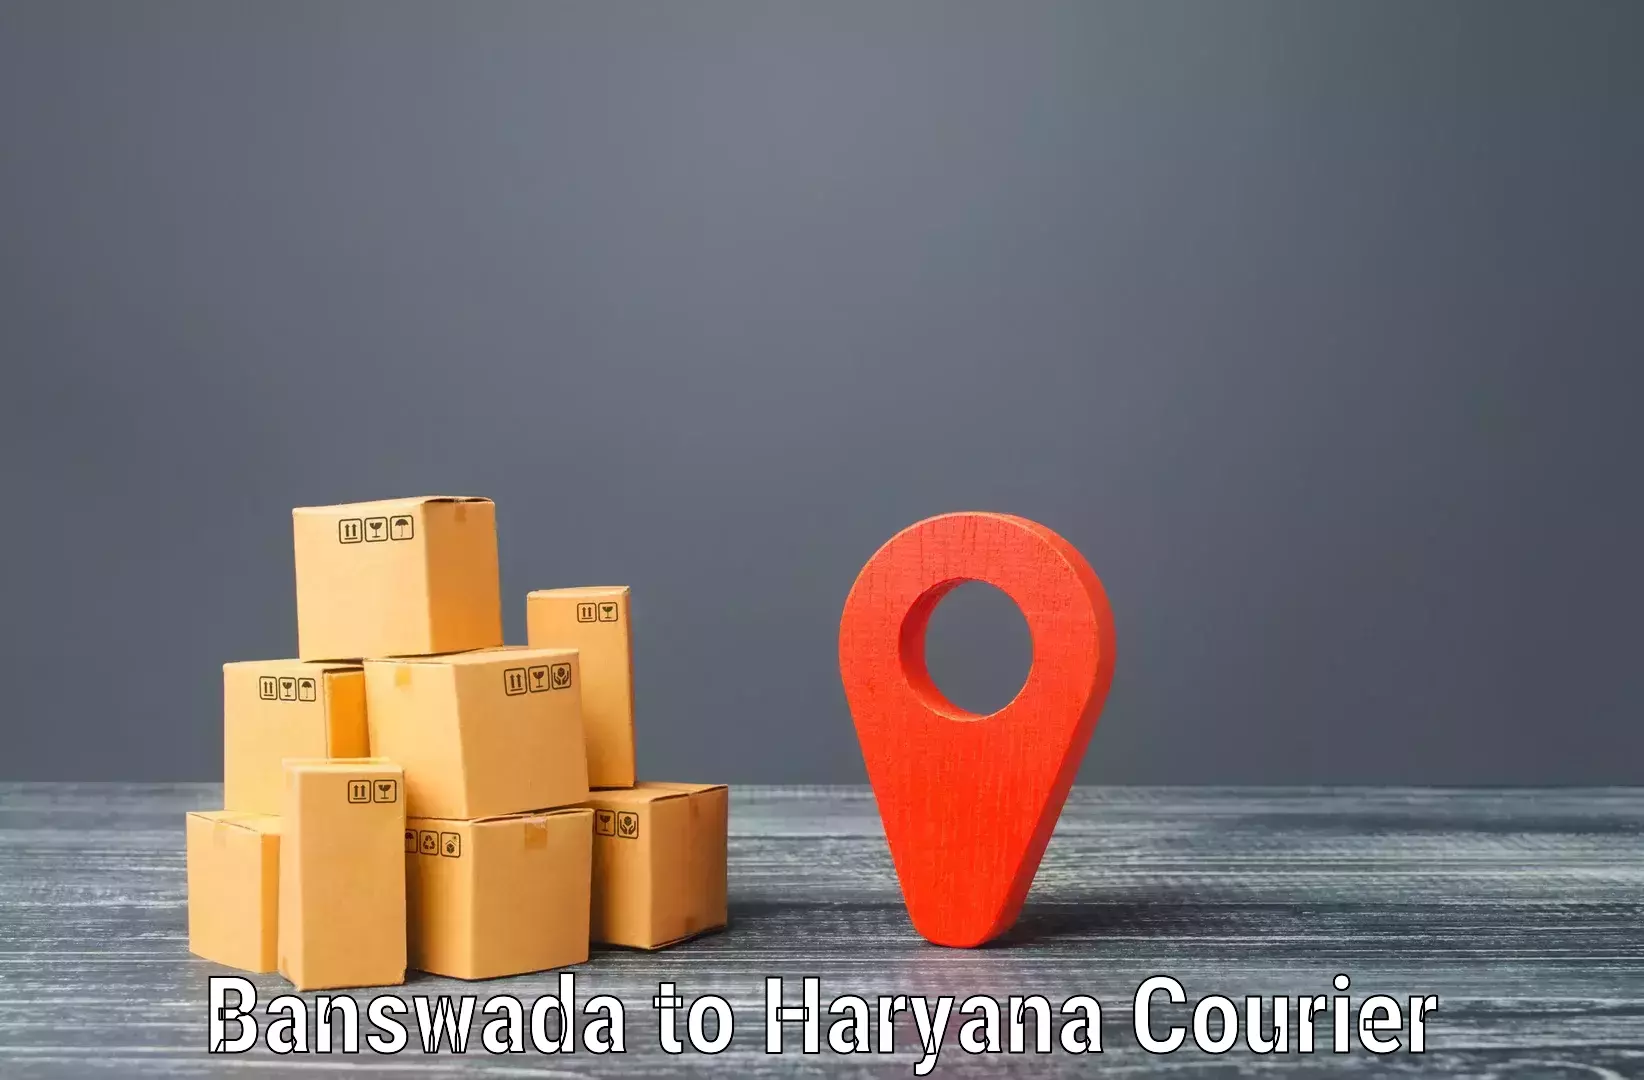 State-of-the-art courier technology Banswada to Sonipat